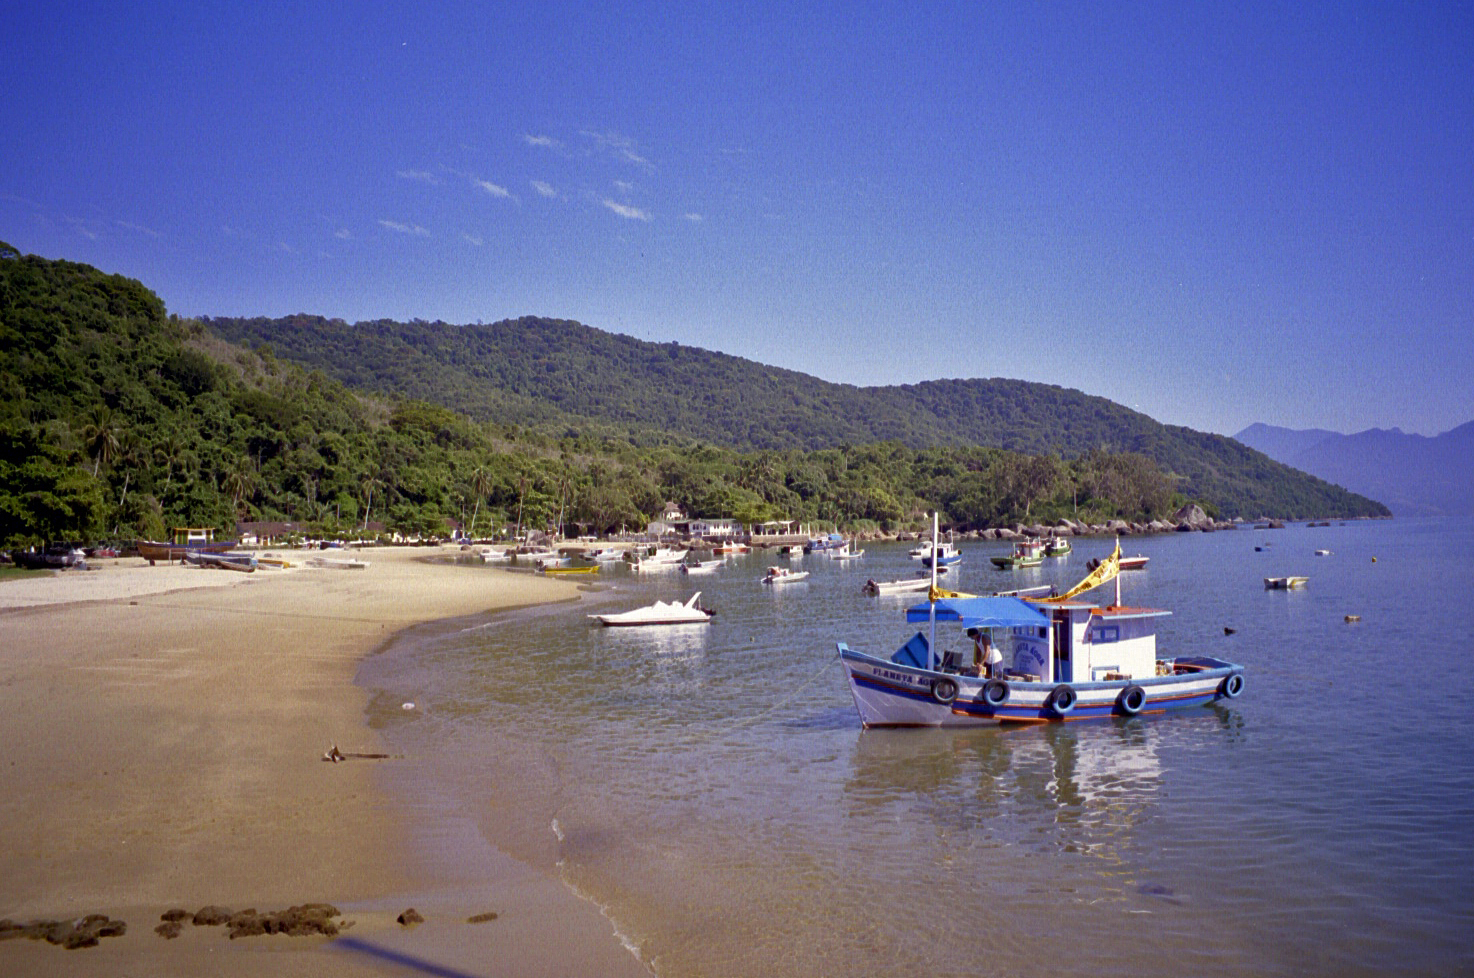 on the Brazilian coast south of Rio de Janeiro (note: this image is not suitable for large prints)